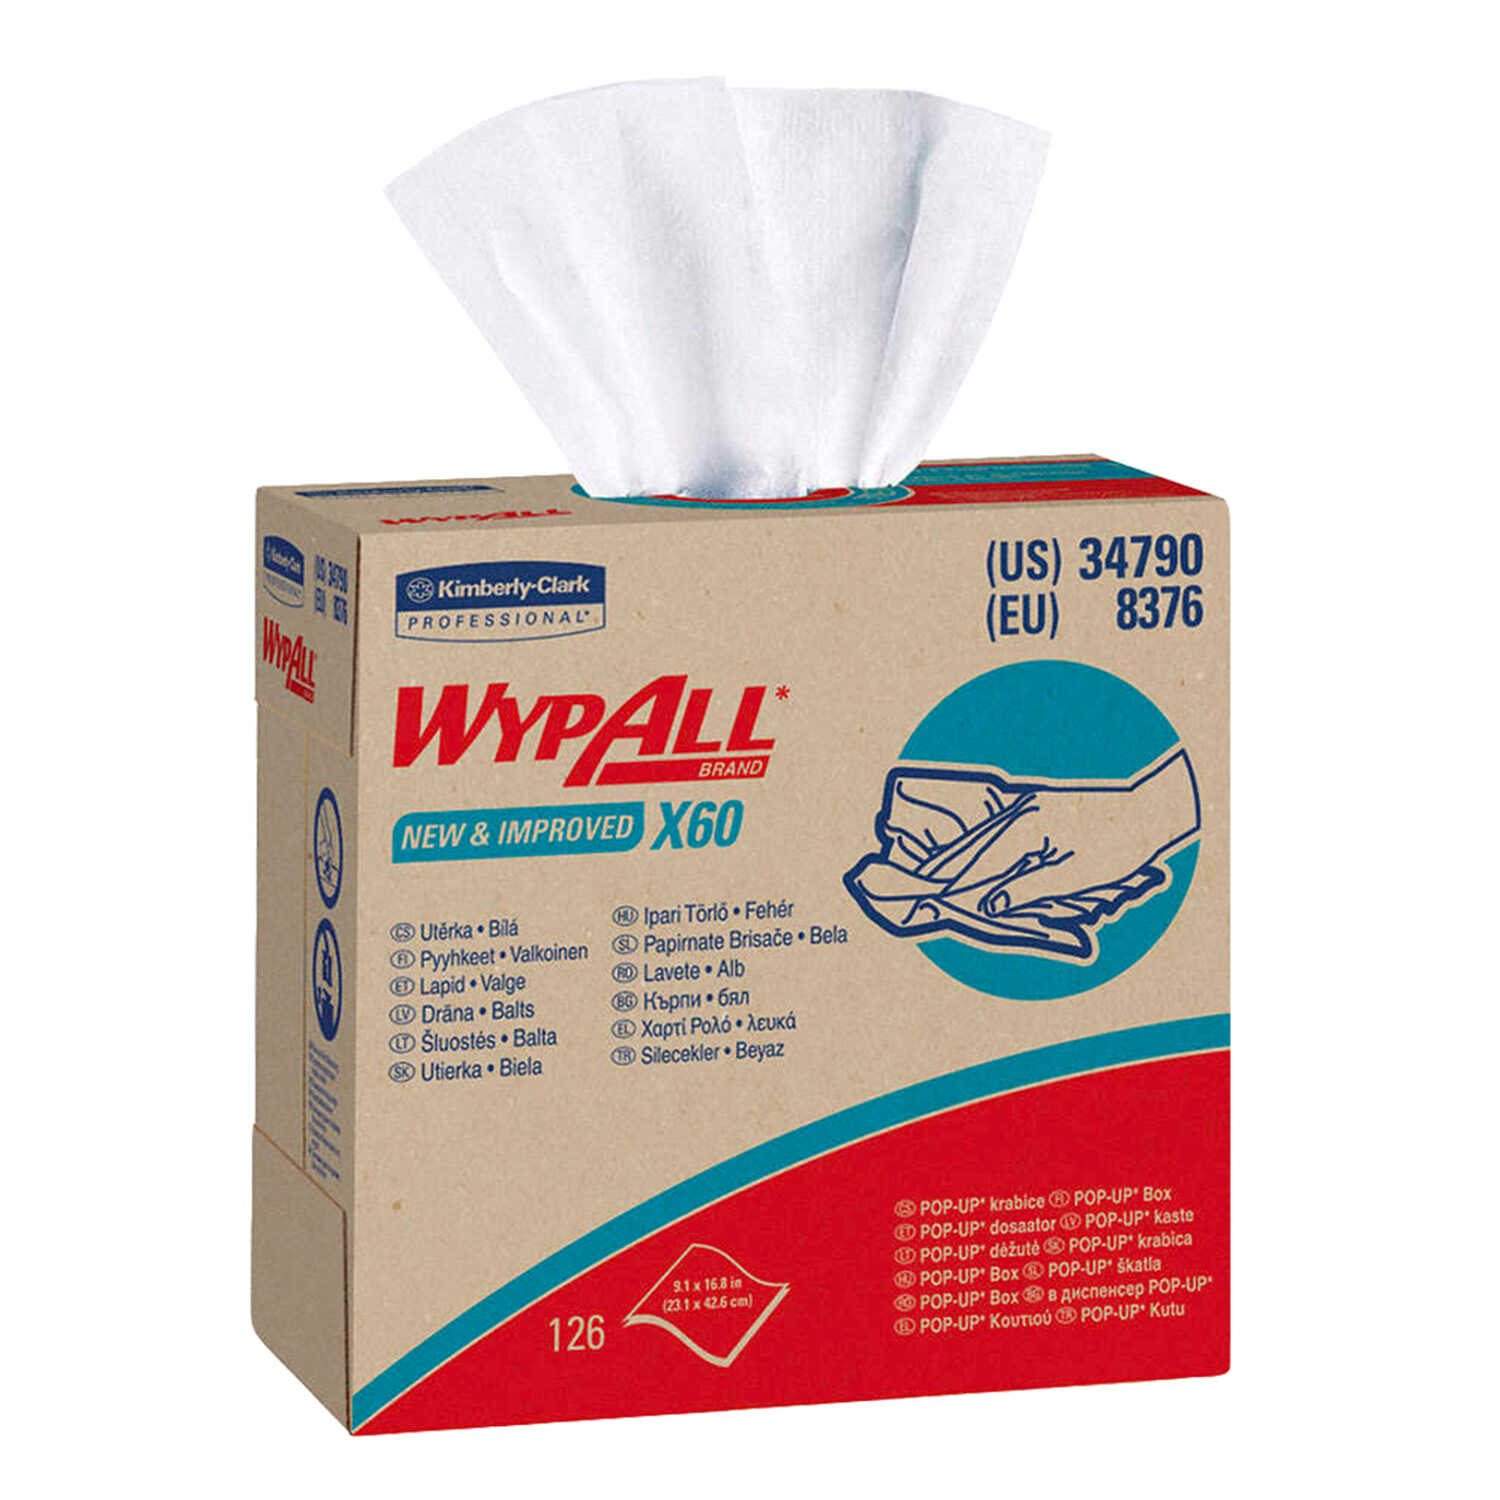 Wypall X60 Wipers / Pop-Up Box / White / 42.60 cm x 23.10 cm, 34790  (Pack of 10)